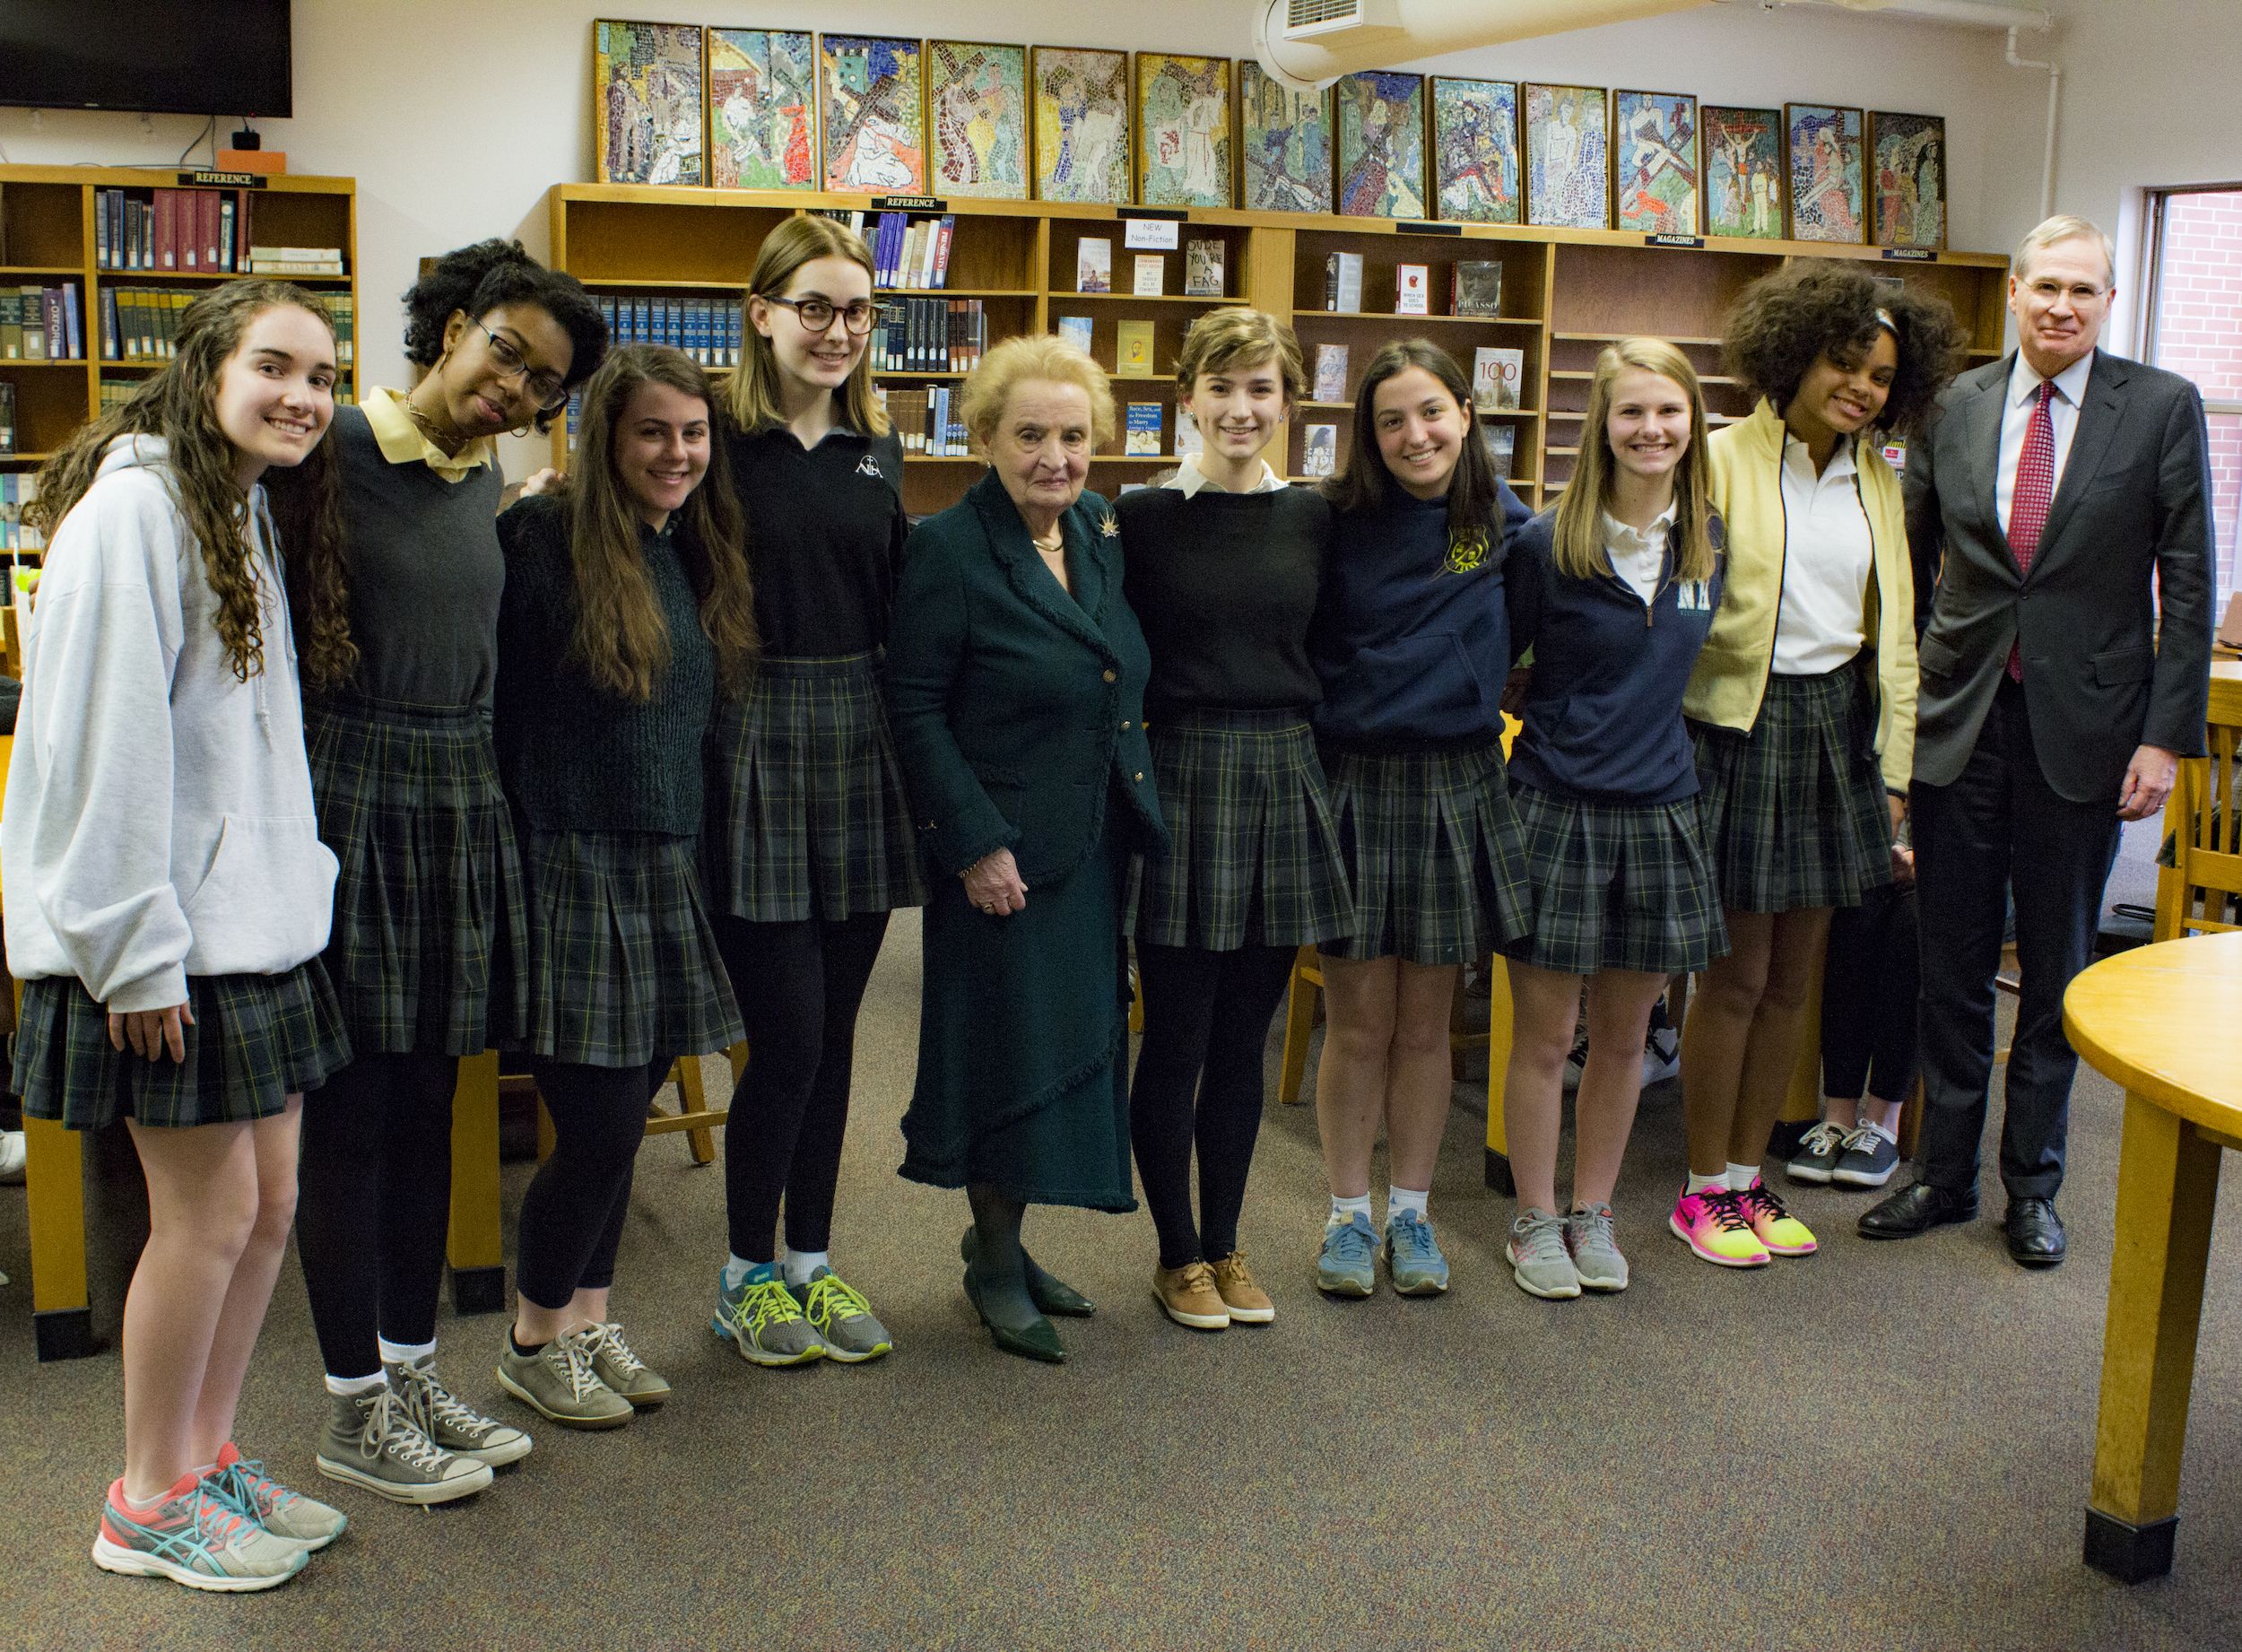 Students involved in a video reflecting on the Middle East Strategy Task Force executive summary, pose with Madeleine Albright and Stephen Hadley, at Nerinx Hall High School in St. Louis, Missouri. Image by Lauren Shepherd, United States, 2017.